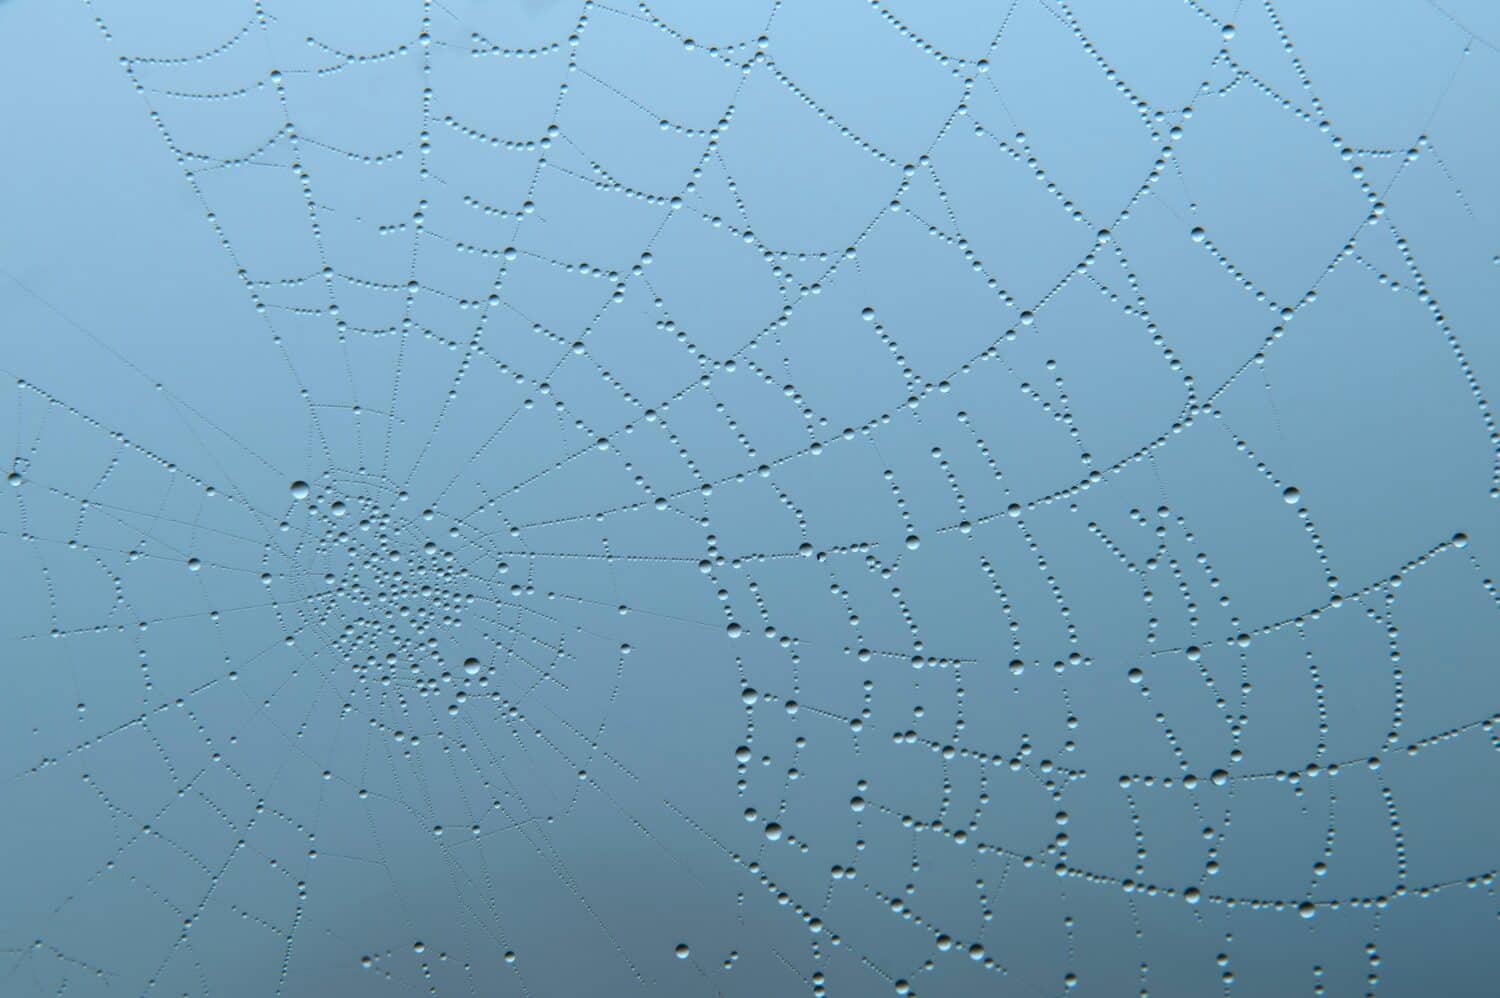 Spider web in foggy weather.The web with dewdrops shimmers in the sun's rays. Spider web of dew drops. Pokut Plateau, Rize.